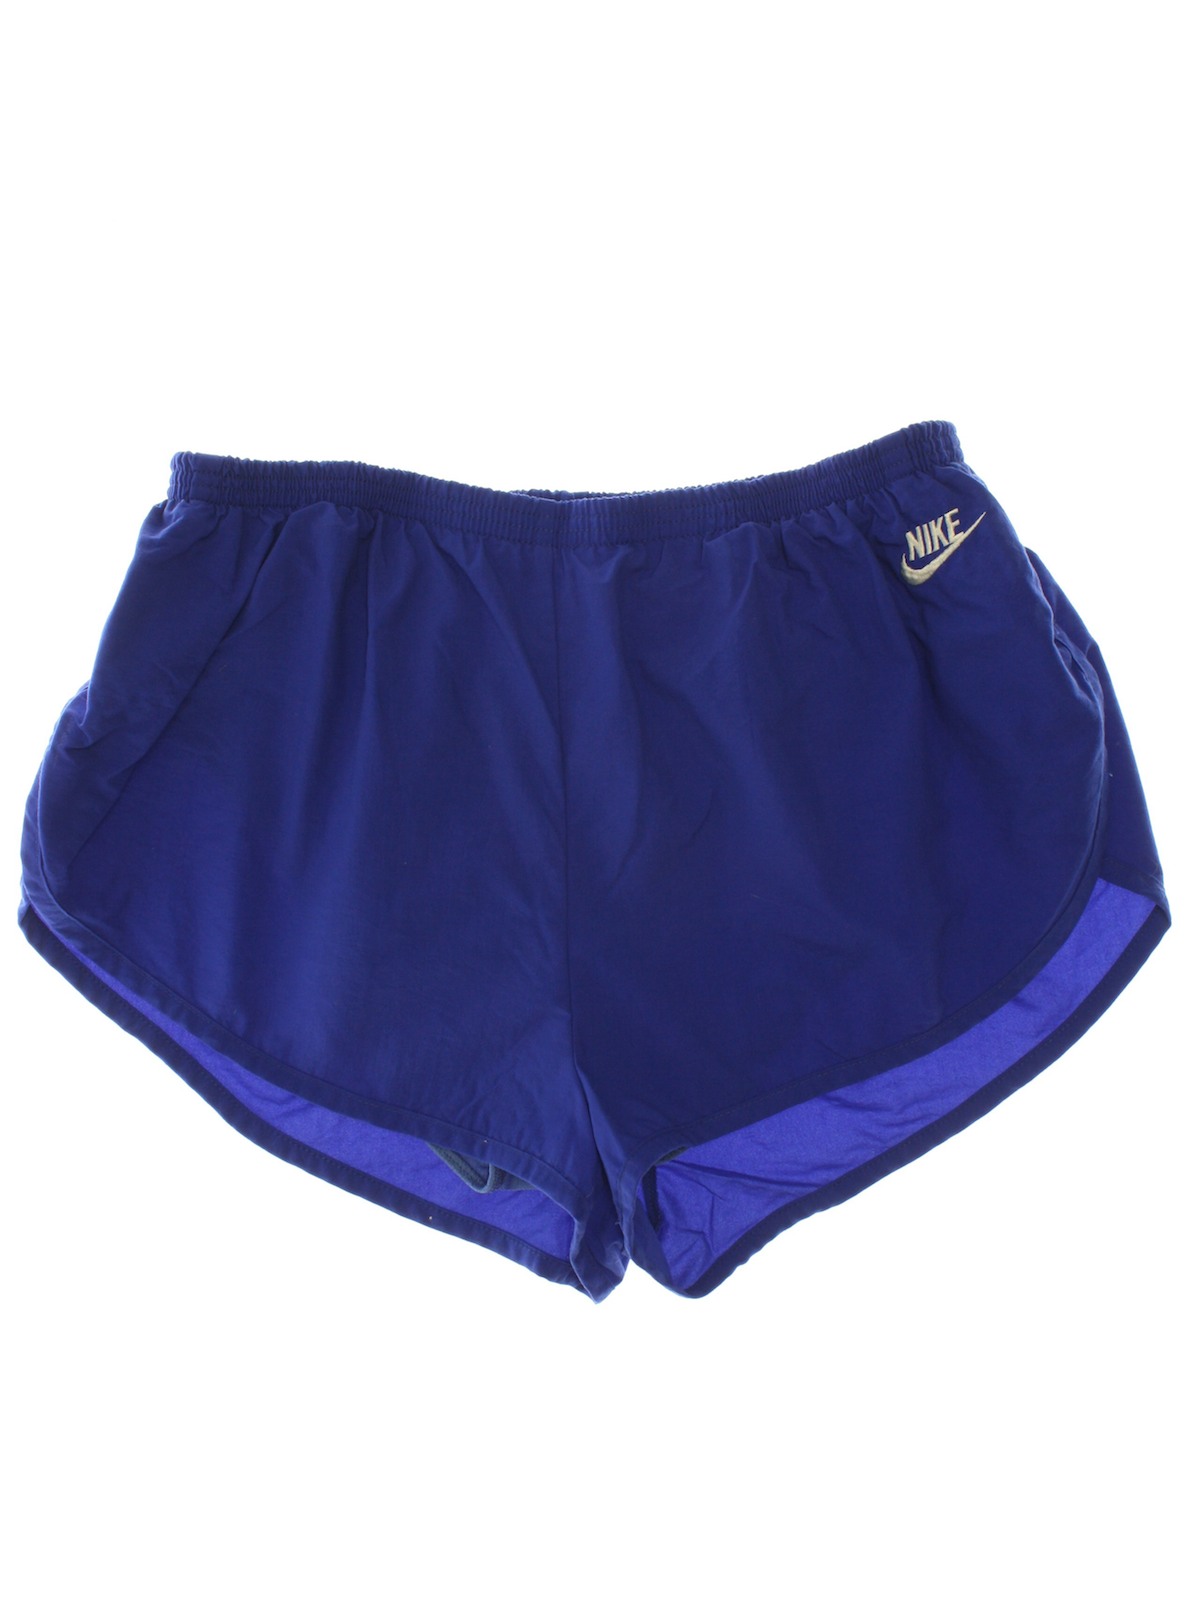 Retro 1990's Shorts (Nike Made in USA) : 90s -Nike Made in USA- Mens ...